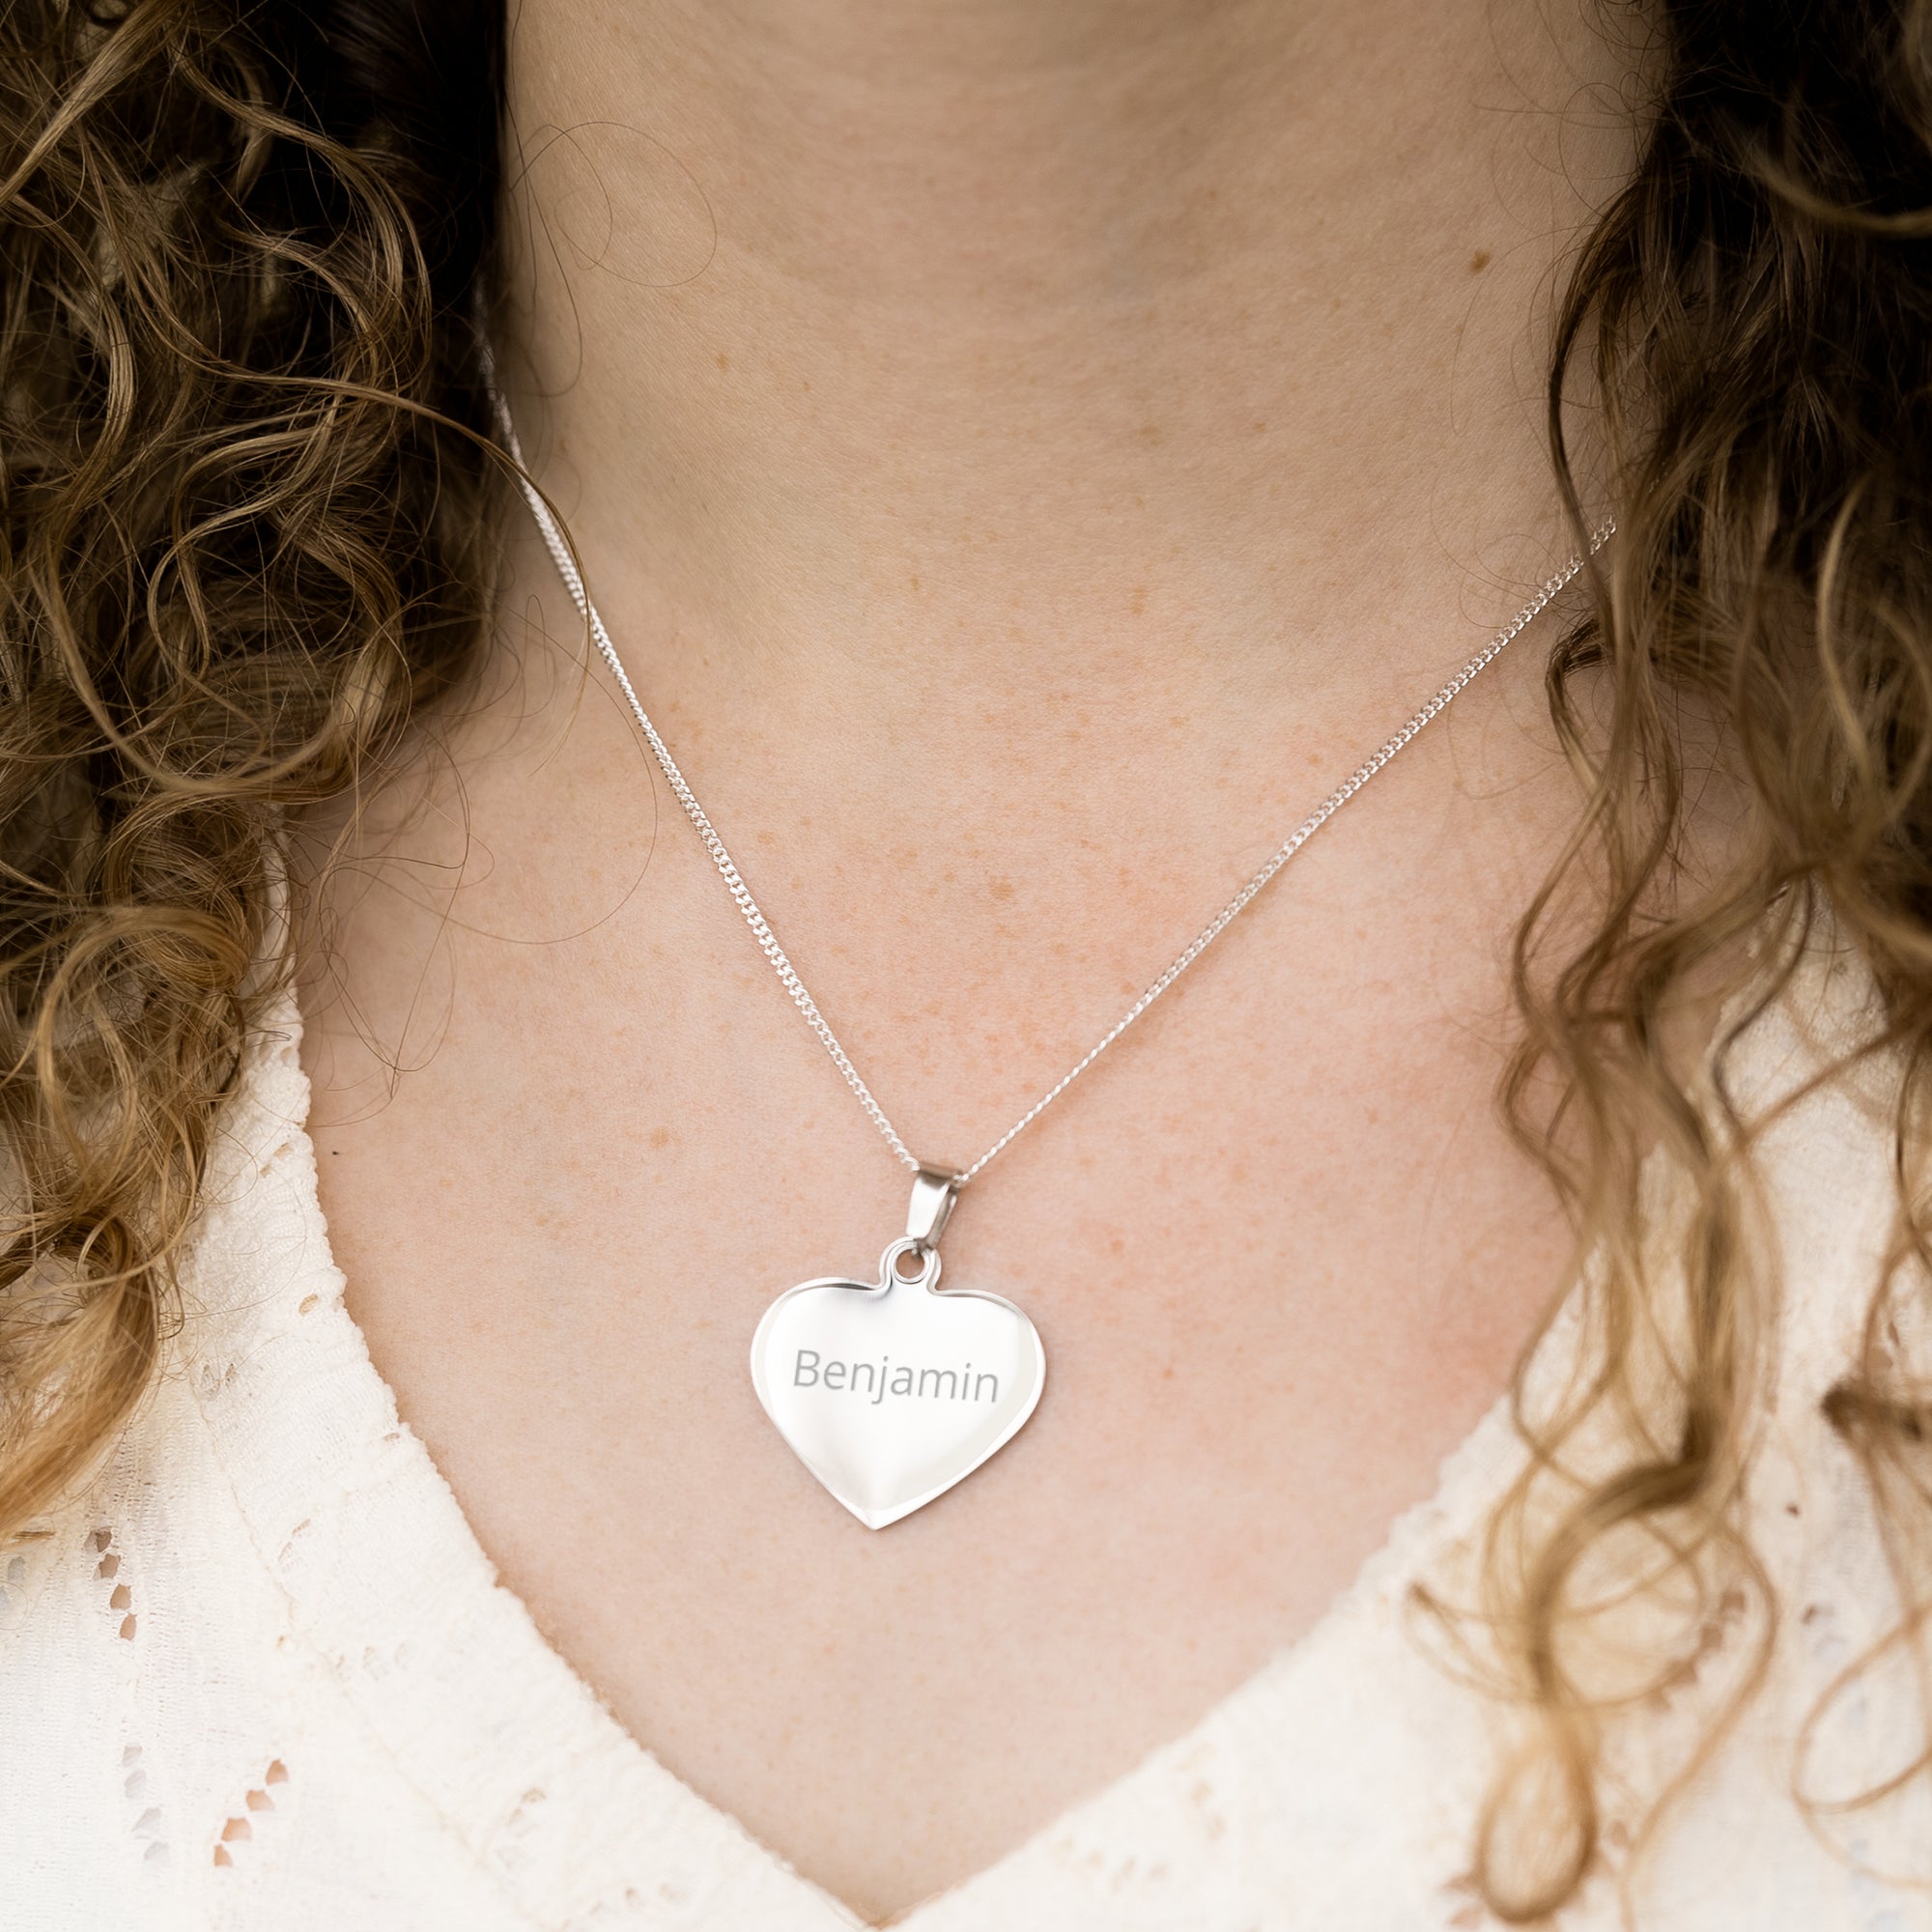 Heart necklace with name - Silver